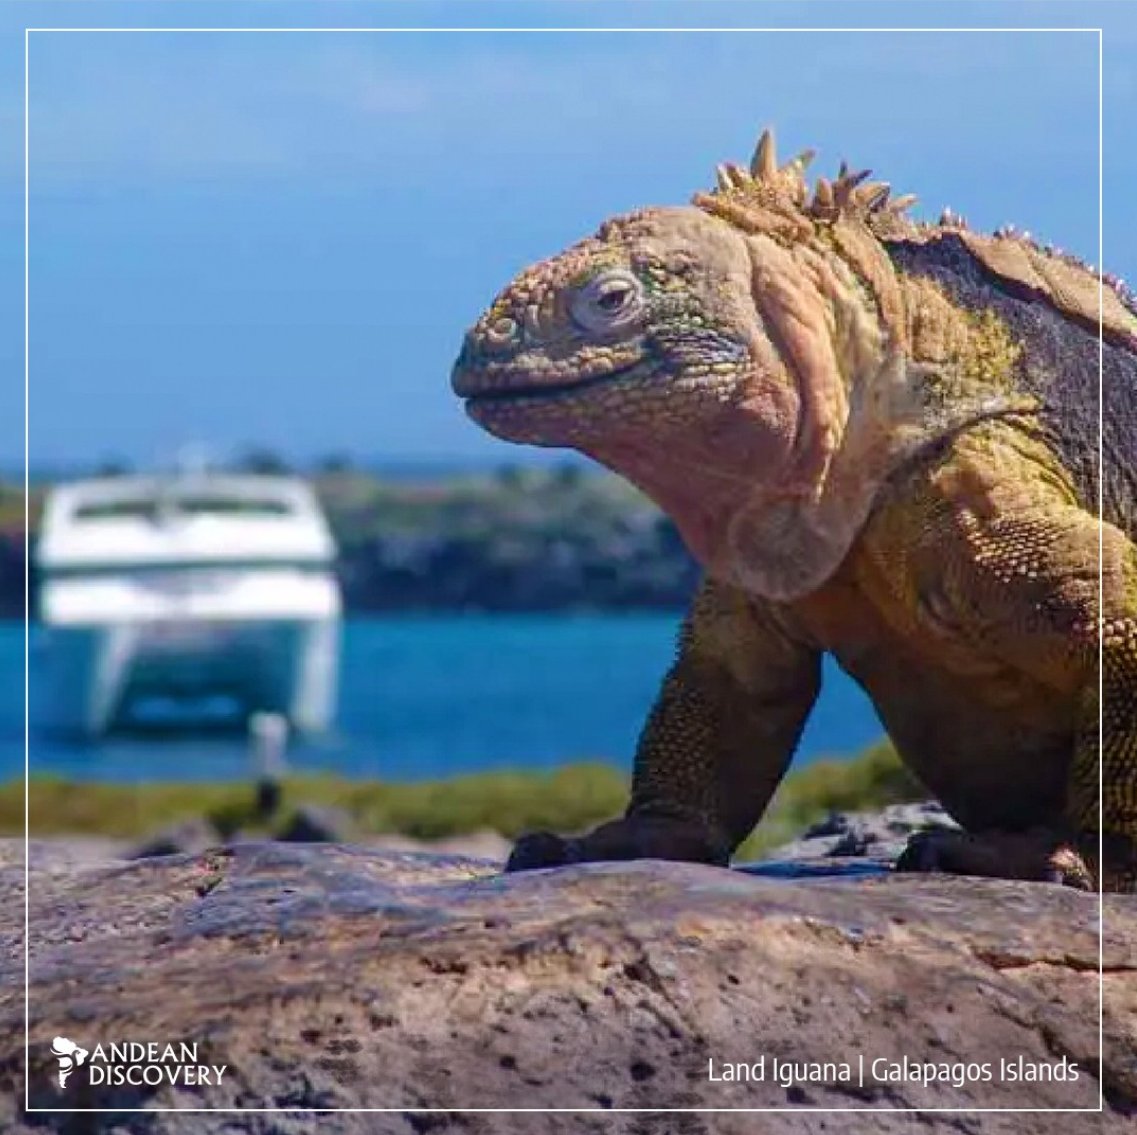 You never know WHO might be watching you as you disembark on the Galapagos Islands.
#Wildlife #galapagosislands #AndeanDiscovery andeandiscovery.com